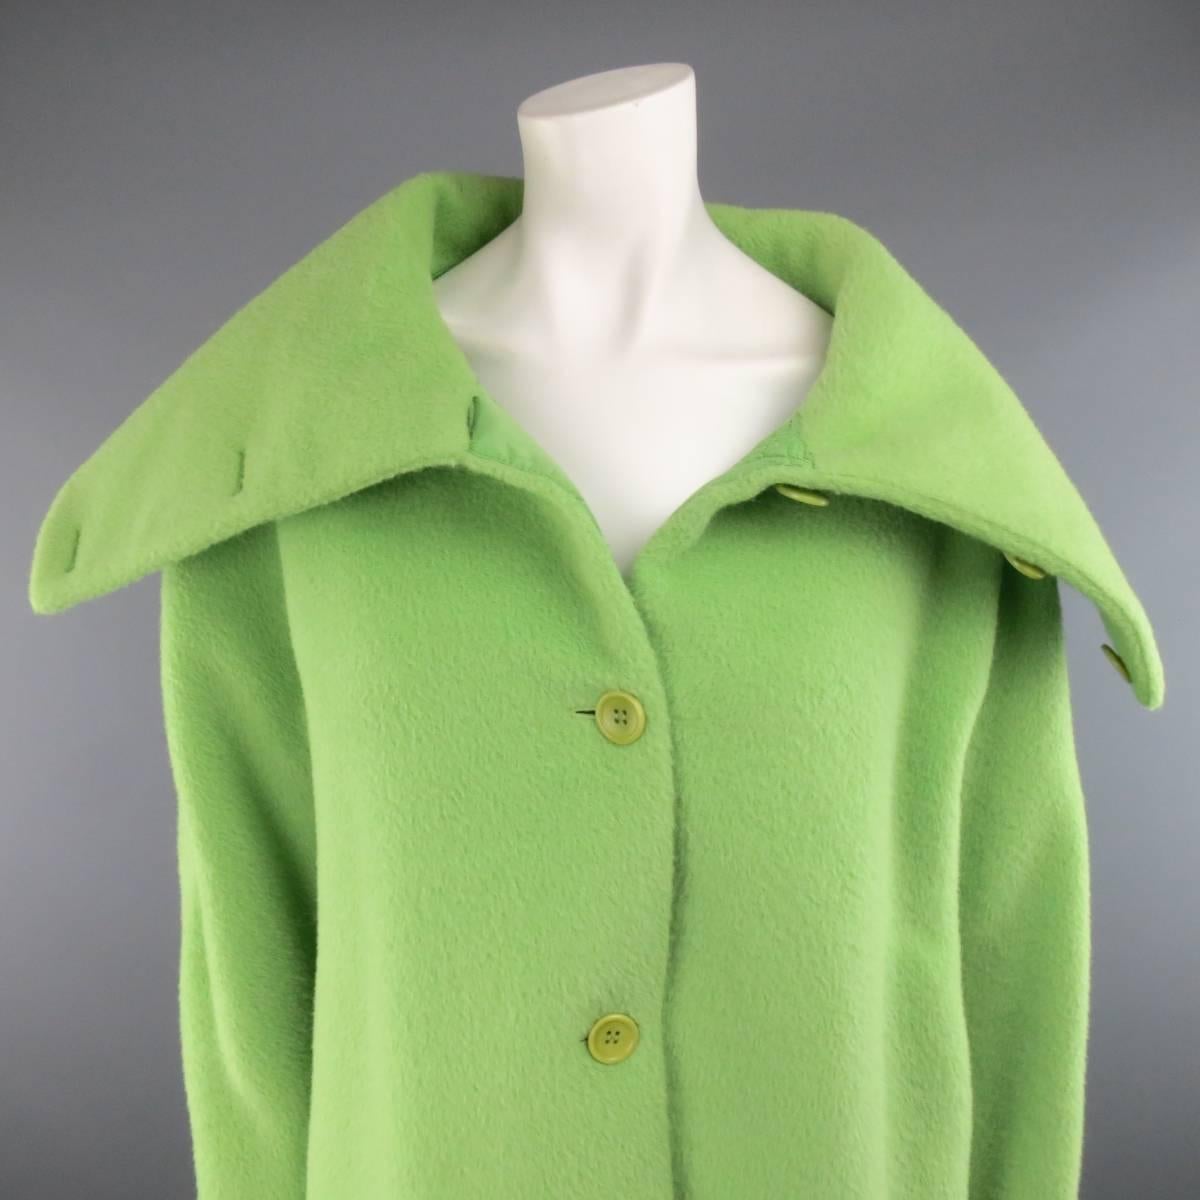 ARMANI COLLEZIONI solid green textured wool coat features an oversized collar, button closure, side slits for a cropped bell shape. Made in Italy.
 
Excellent Pre-Owned Condition.
Marked: 10
 
Measurements:
 
Shoulders:36 In.
Bust: 48 In.
Sleeve: 